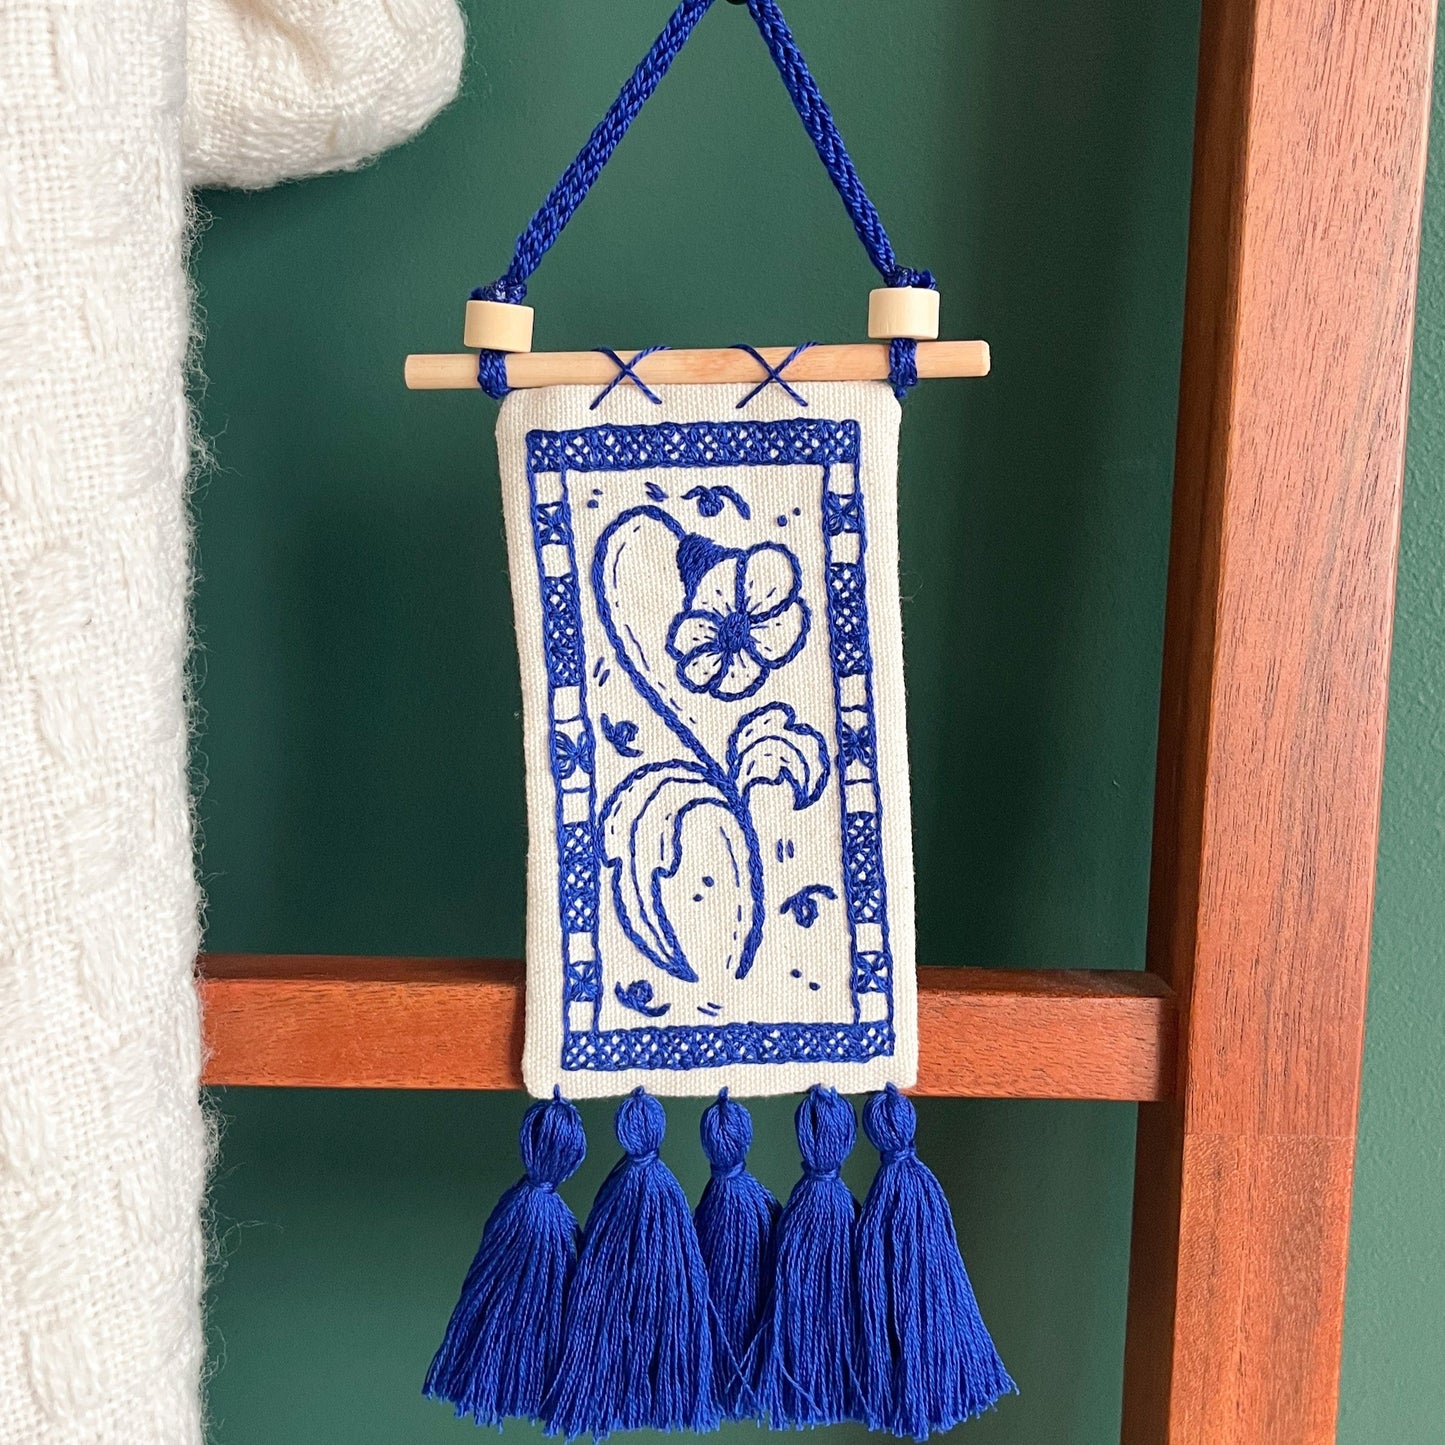 Day 9: Blue Embroidered Tapestry